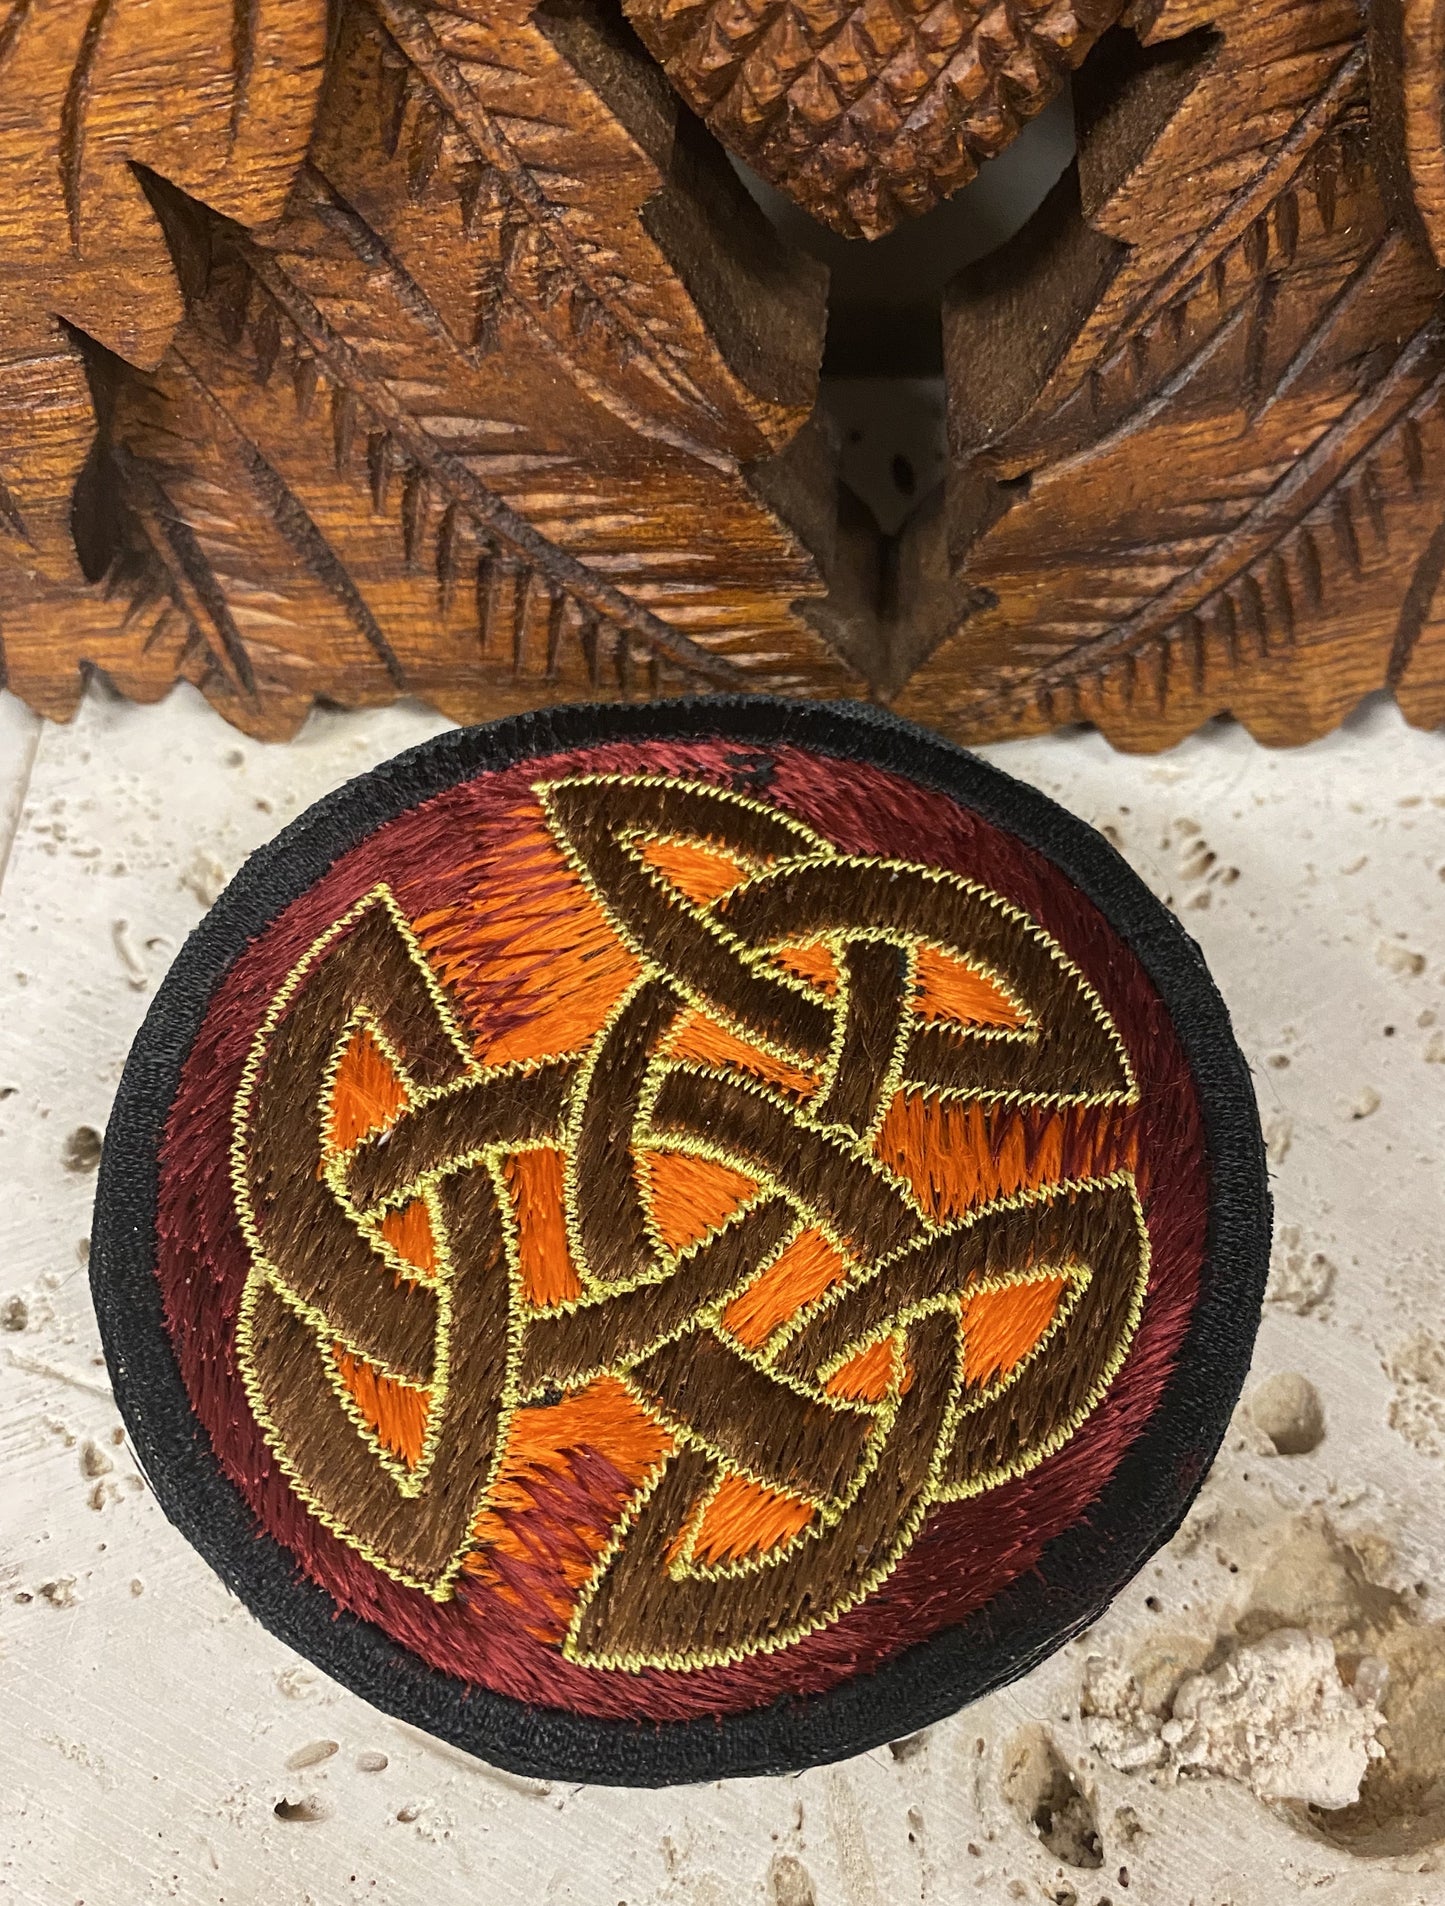 Handmade Embroidered Buddhist Knot Rainbow Patches